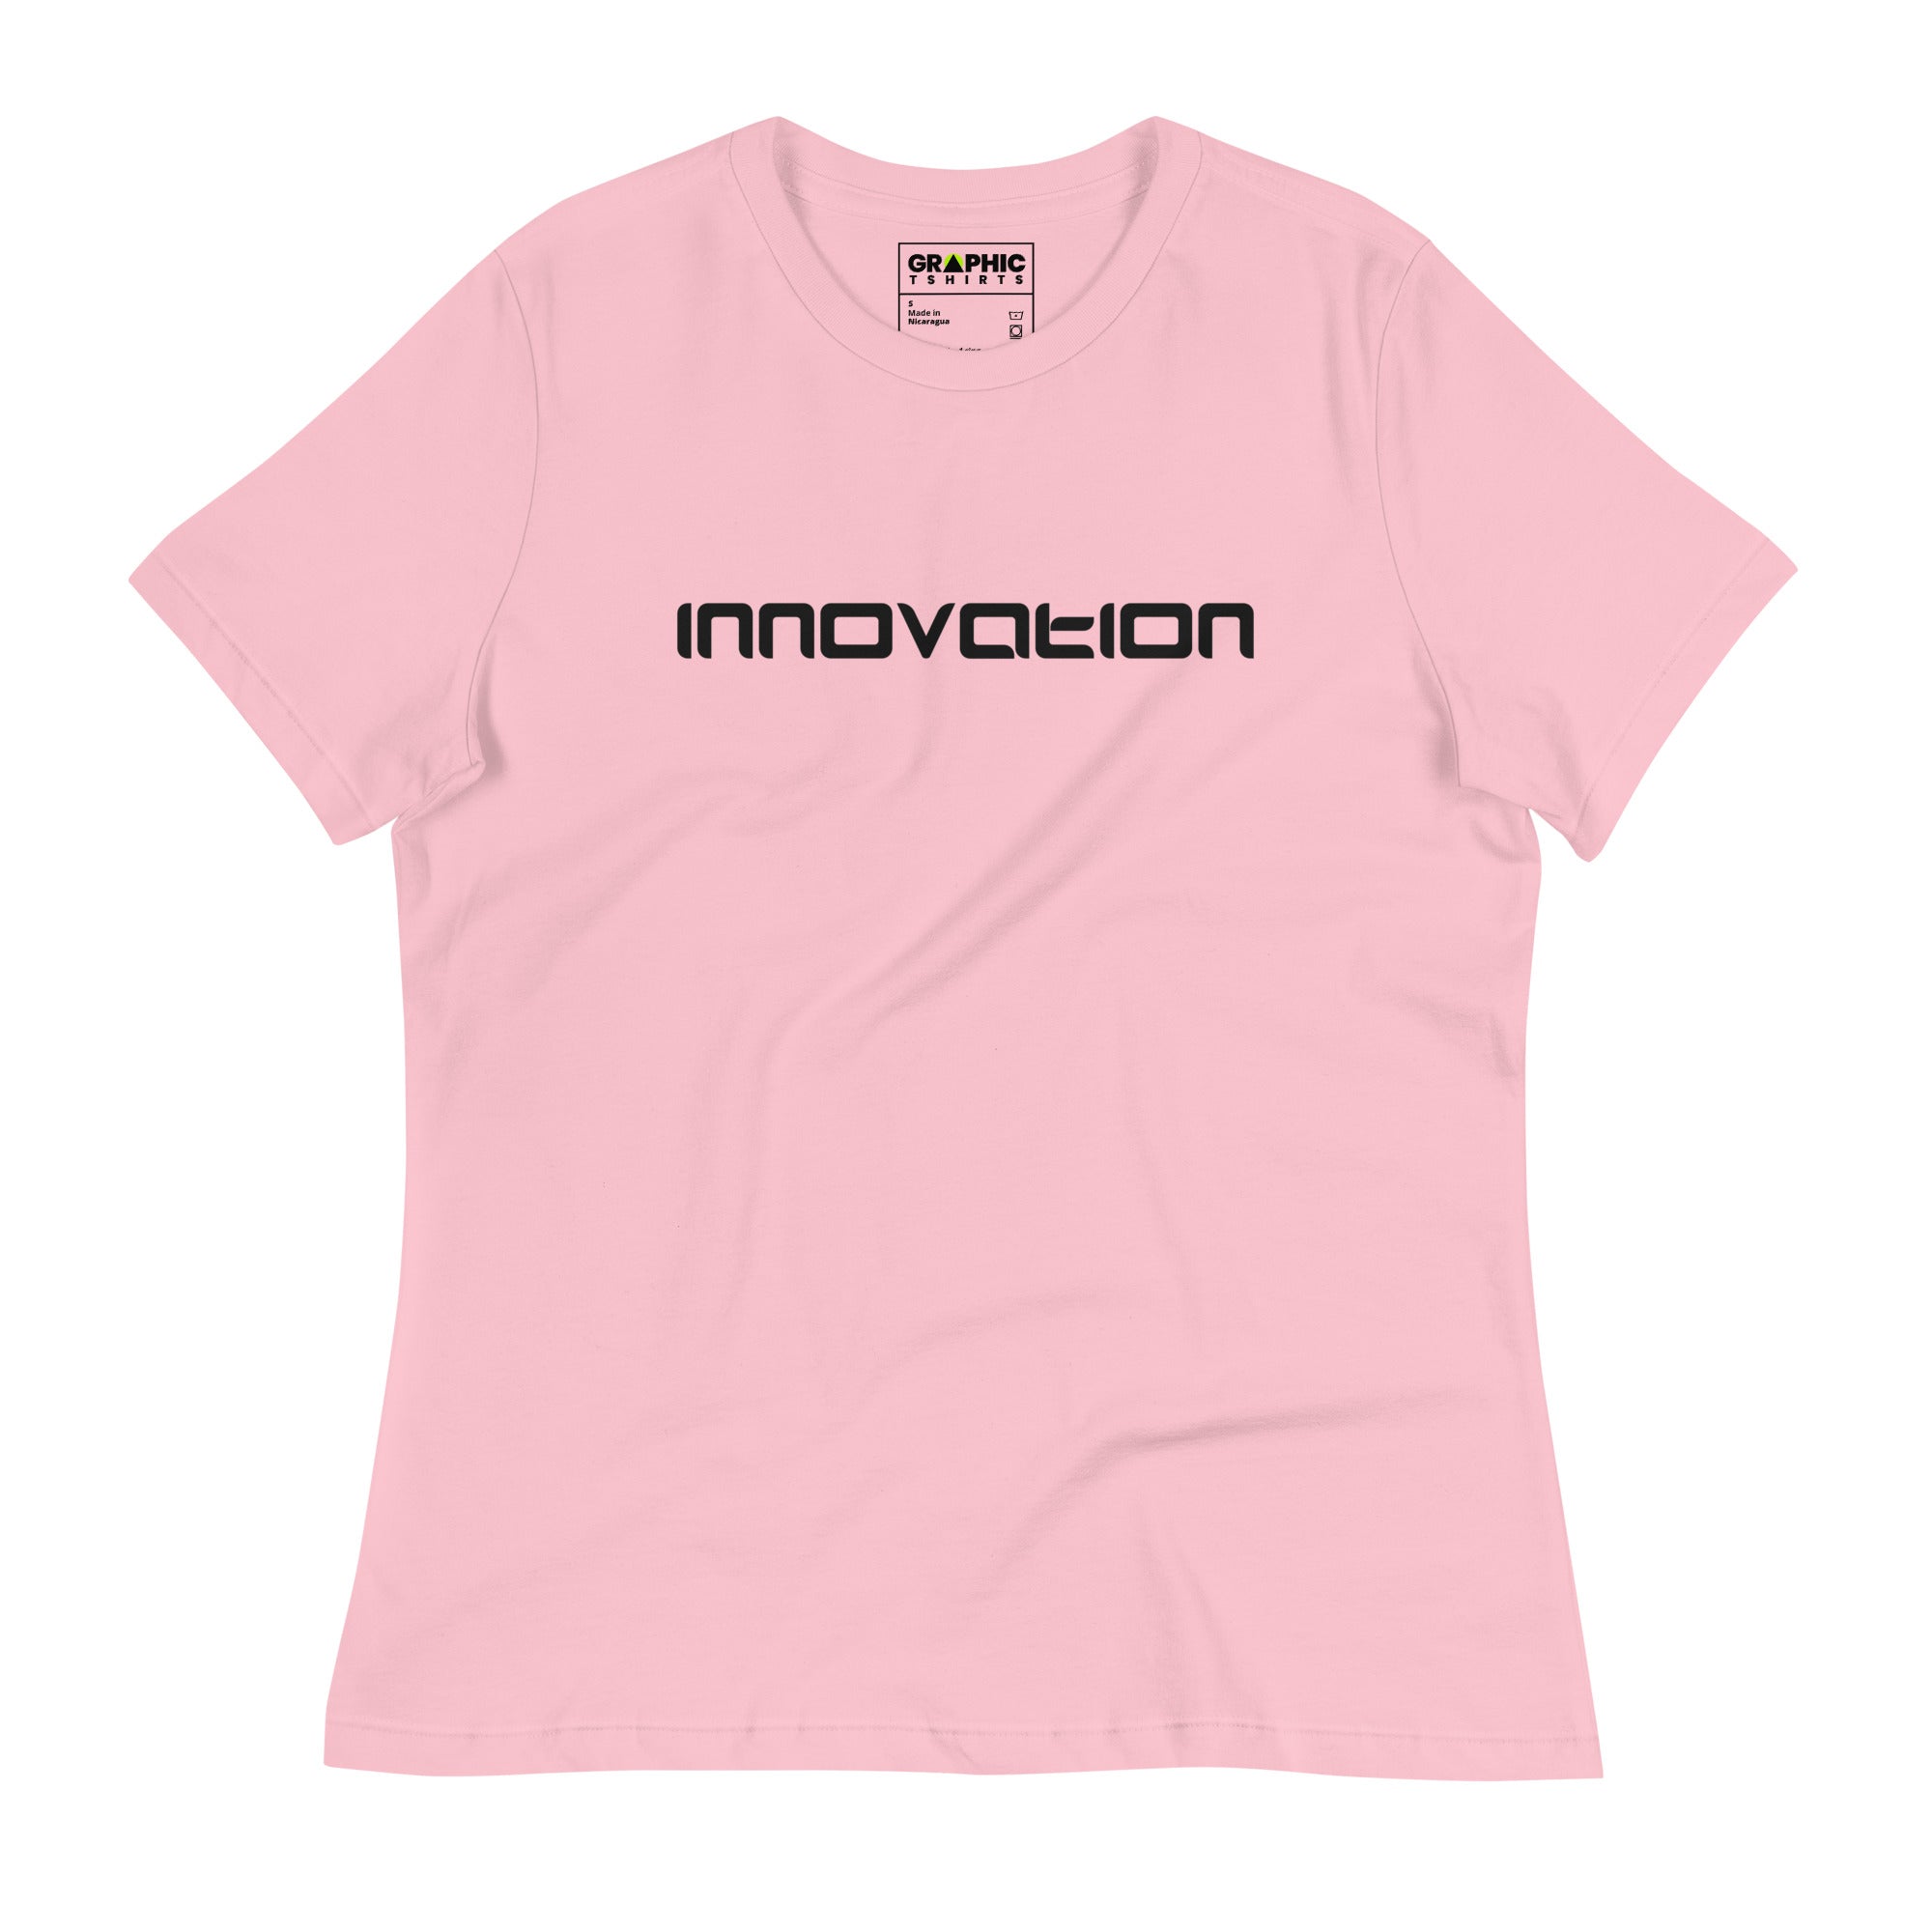 Women's Relaxed T-Shirt - Innovation - GRAPHIC T-SHIRTS